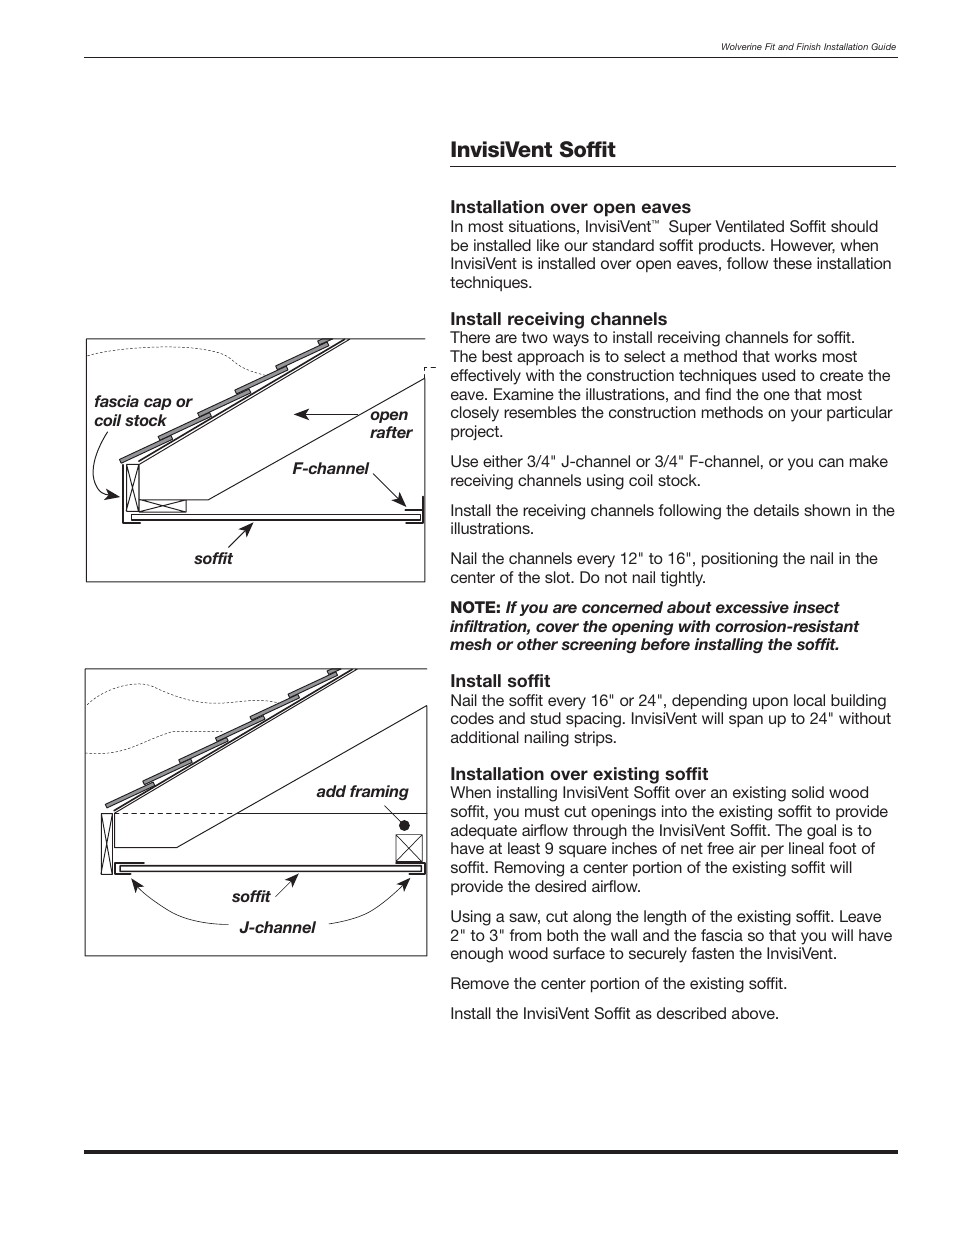 Invisivent Soffit Wolverine Siding And Vinyl Carpentry Soffit And Decorative Trim User Manual Page 78 117